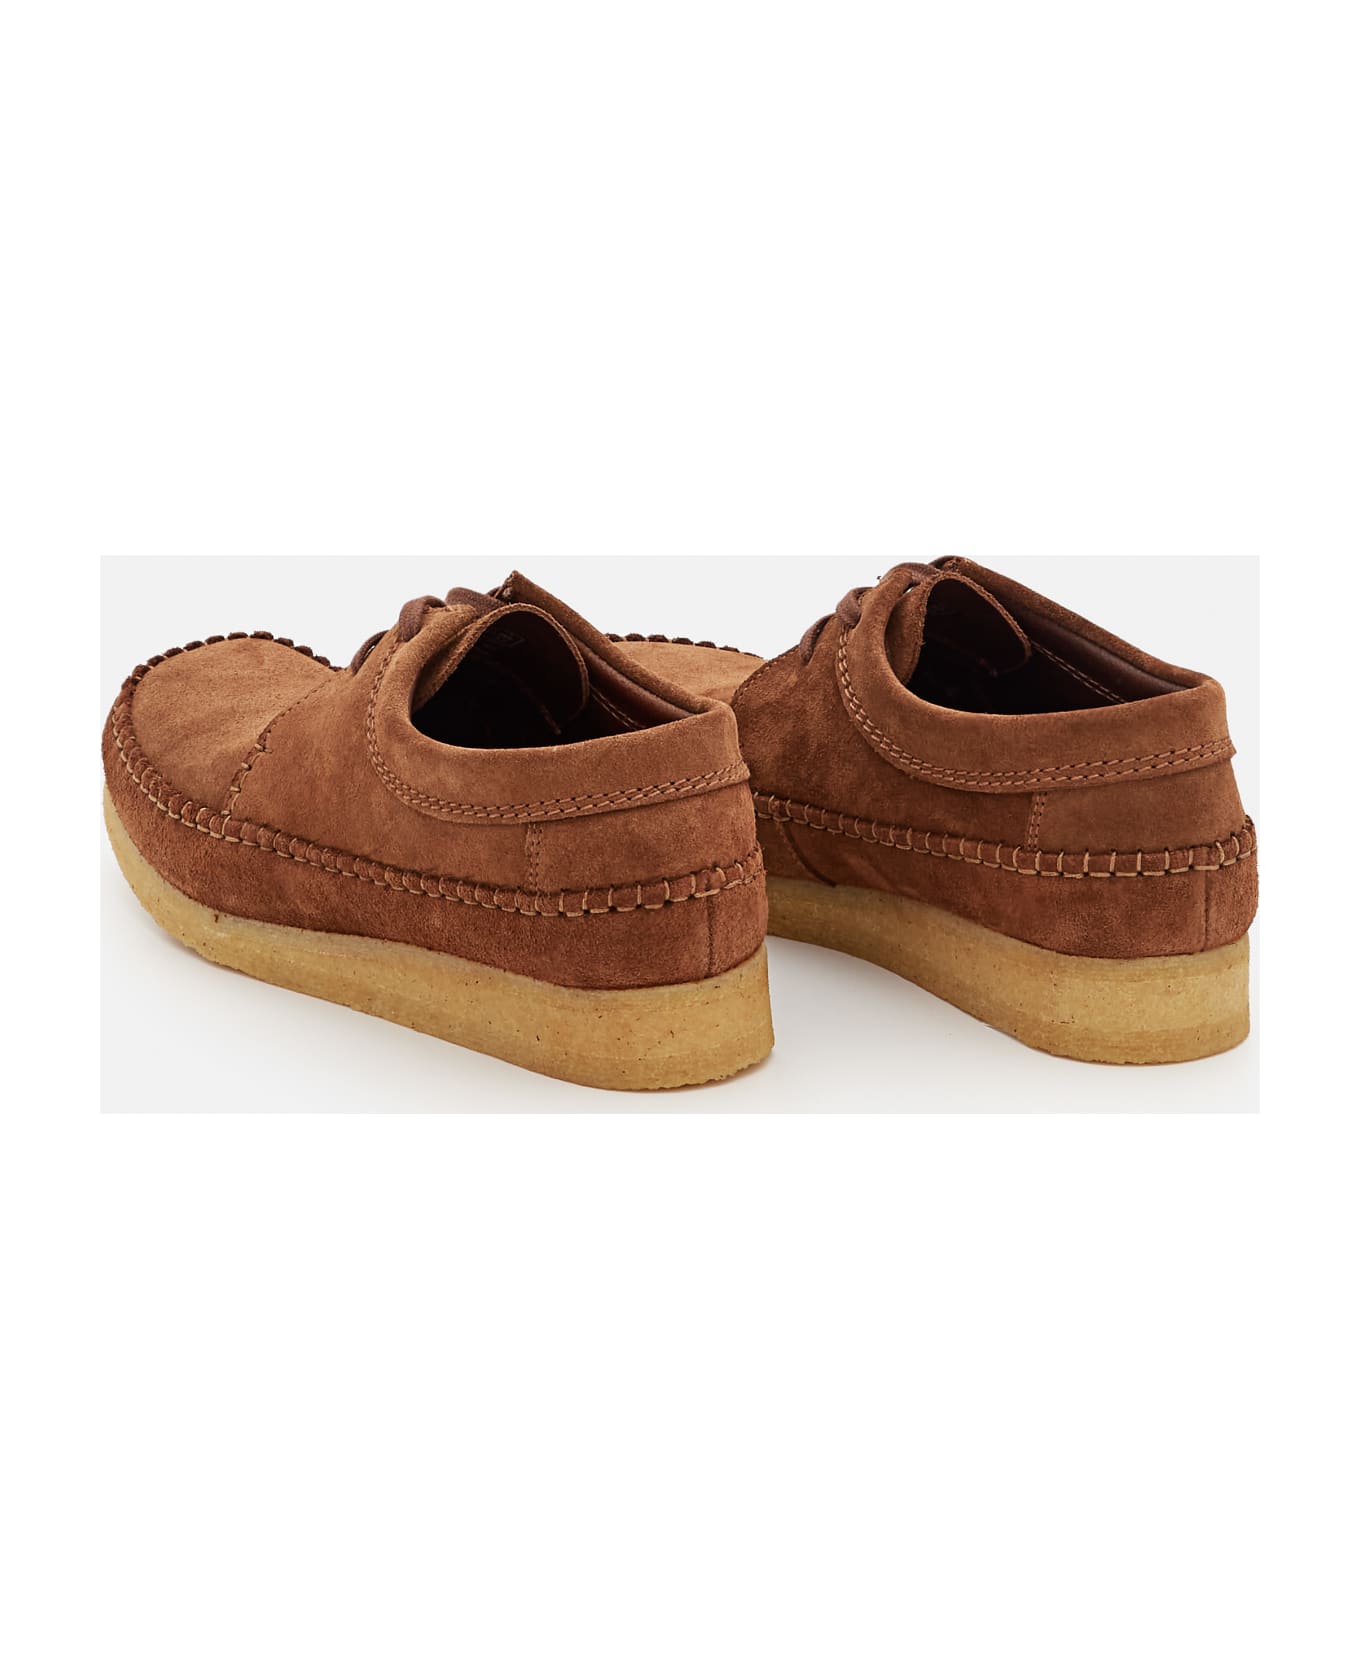 Clarks Weaver Suede Lace-up Shoes - Brown